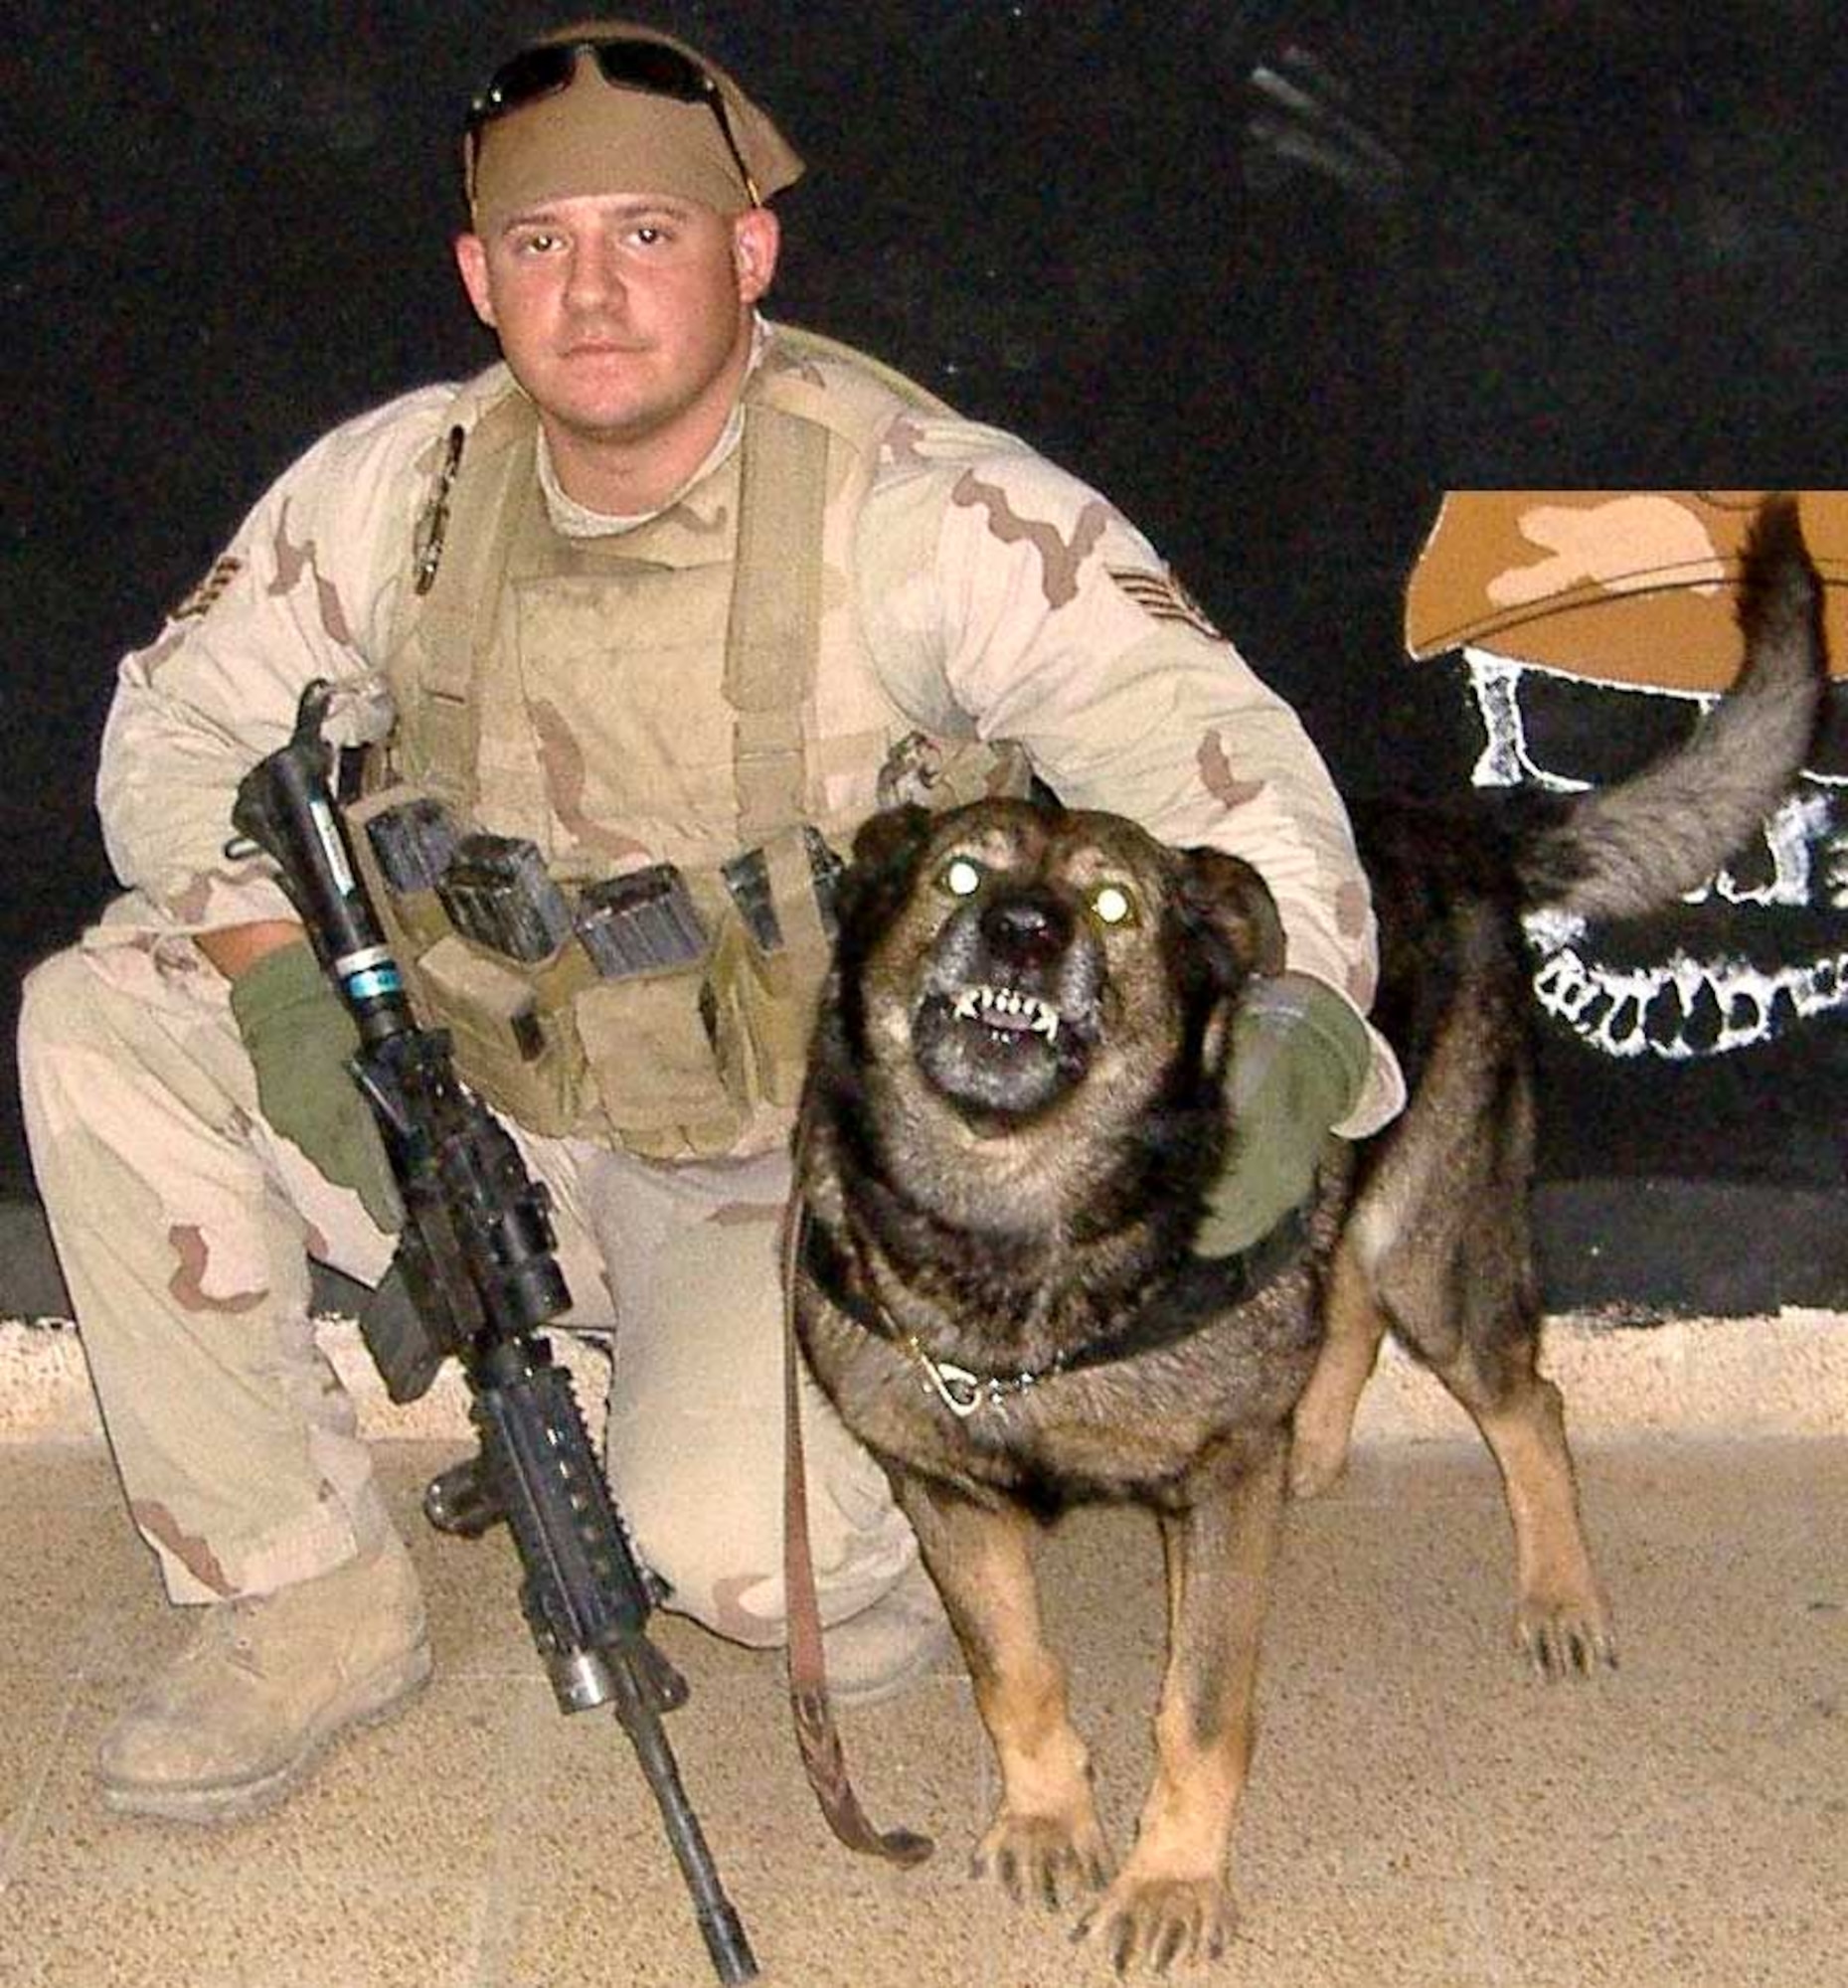 Military Working Dog Arko served with the 60th Security Forces Squadron for almost 7 years as an explosive detector and patrol dog helping provide a secure operating environment for Team Travis and various deployed locations.  (U.S. Air Force photo)